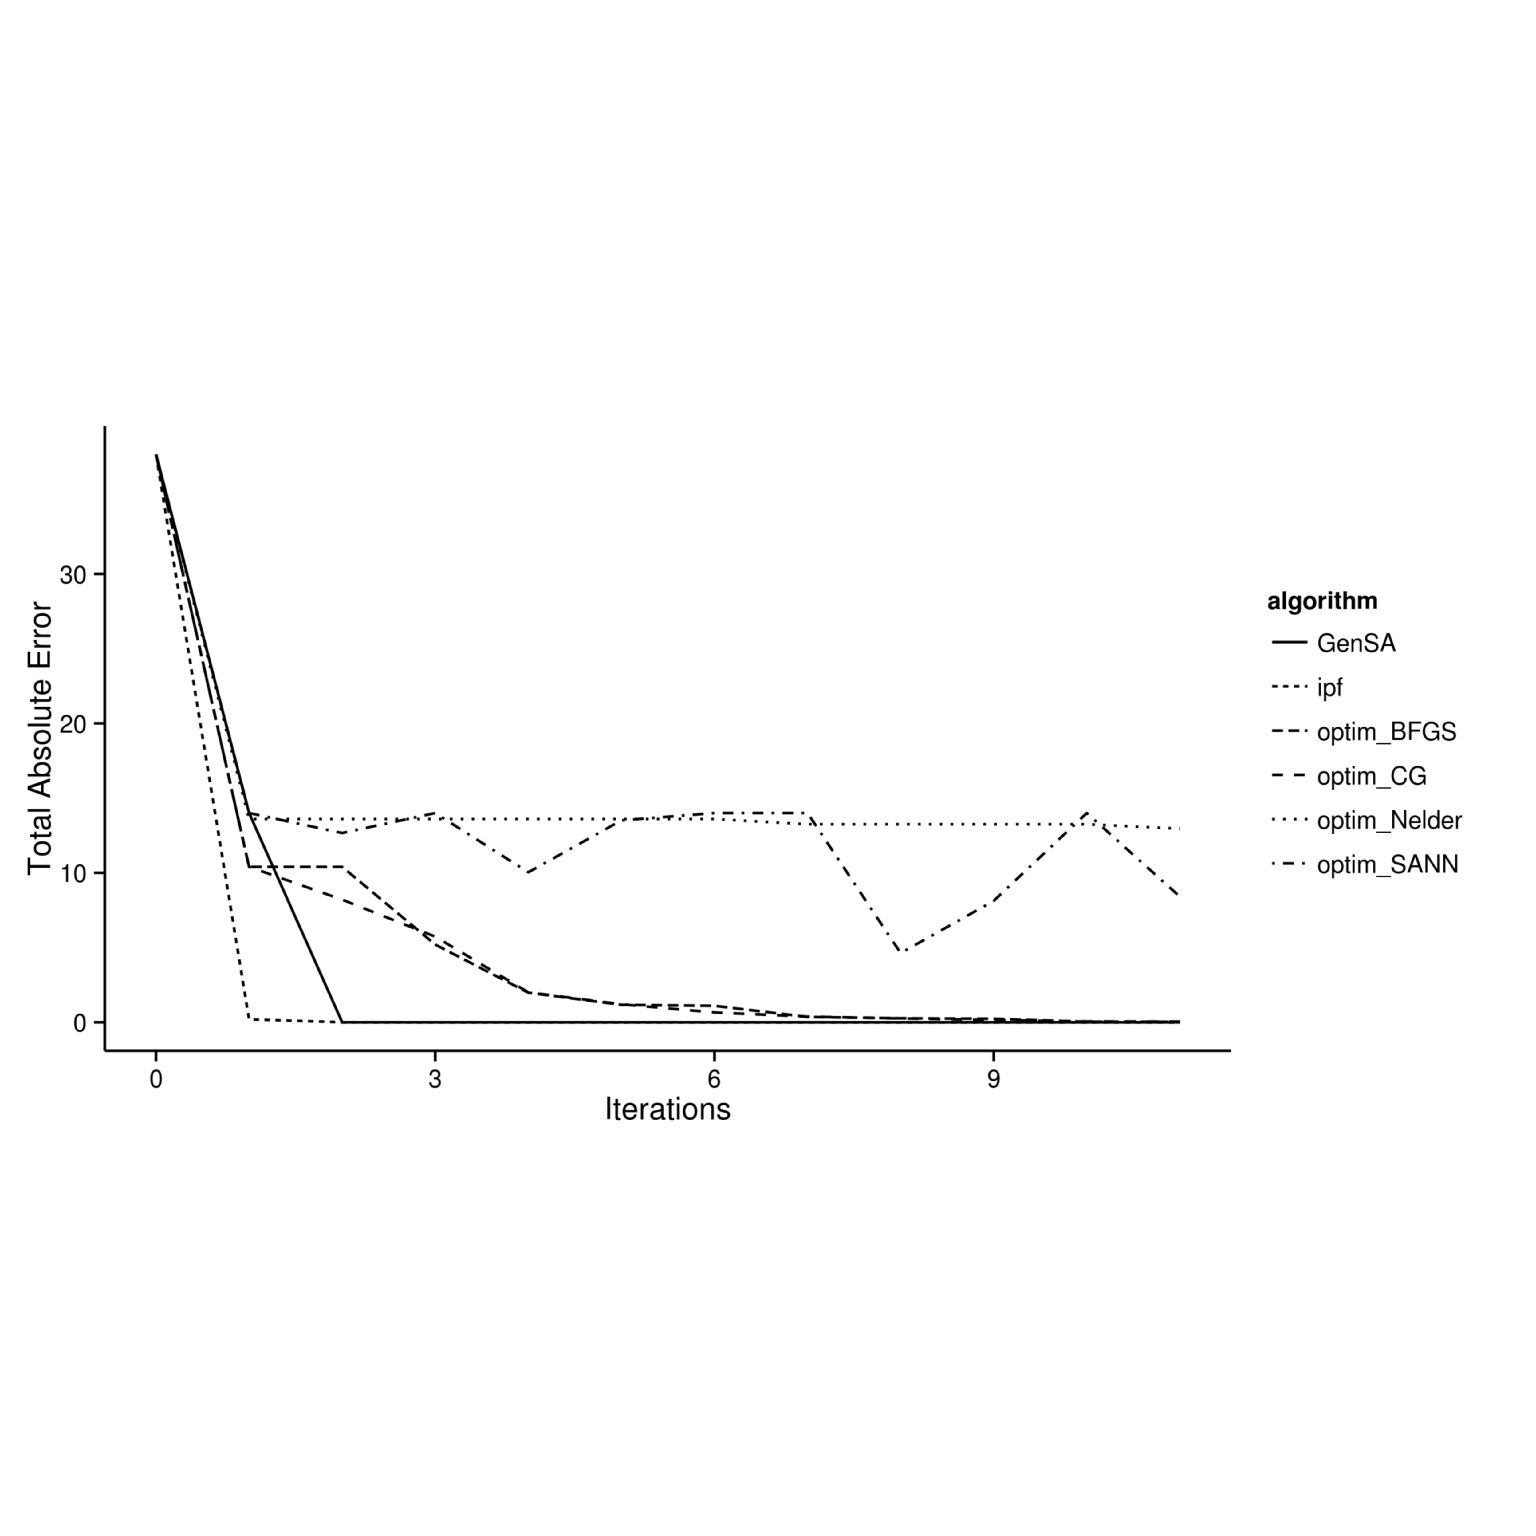 Relationship between number of iterations and goodness-of-fit between observed and simulated results for different optimisation algorithms.